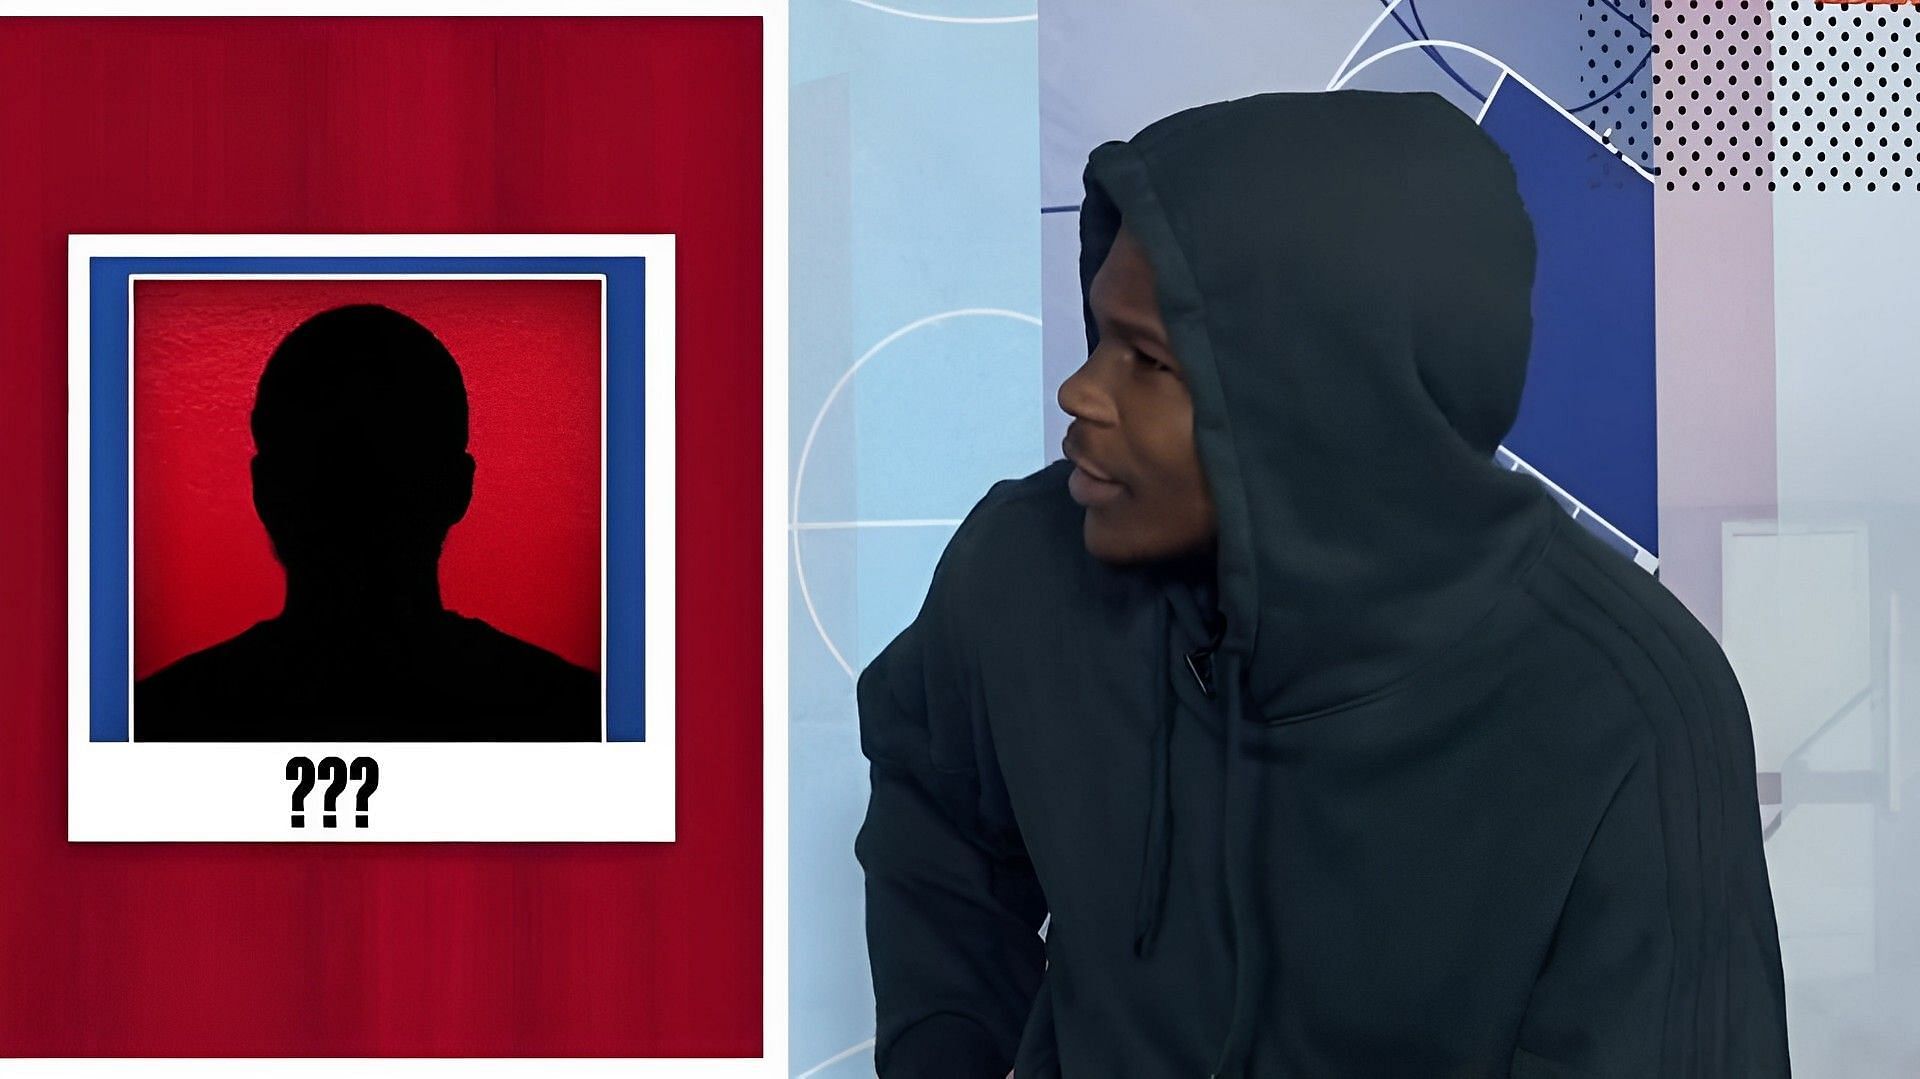 Watch: Anthony Edwards displays extraordinary observation skills by accurately guessing silhouettes of NBA stars